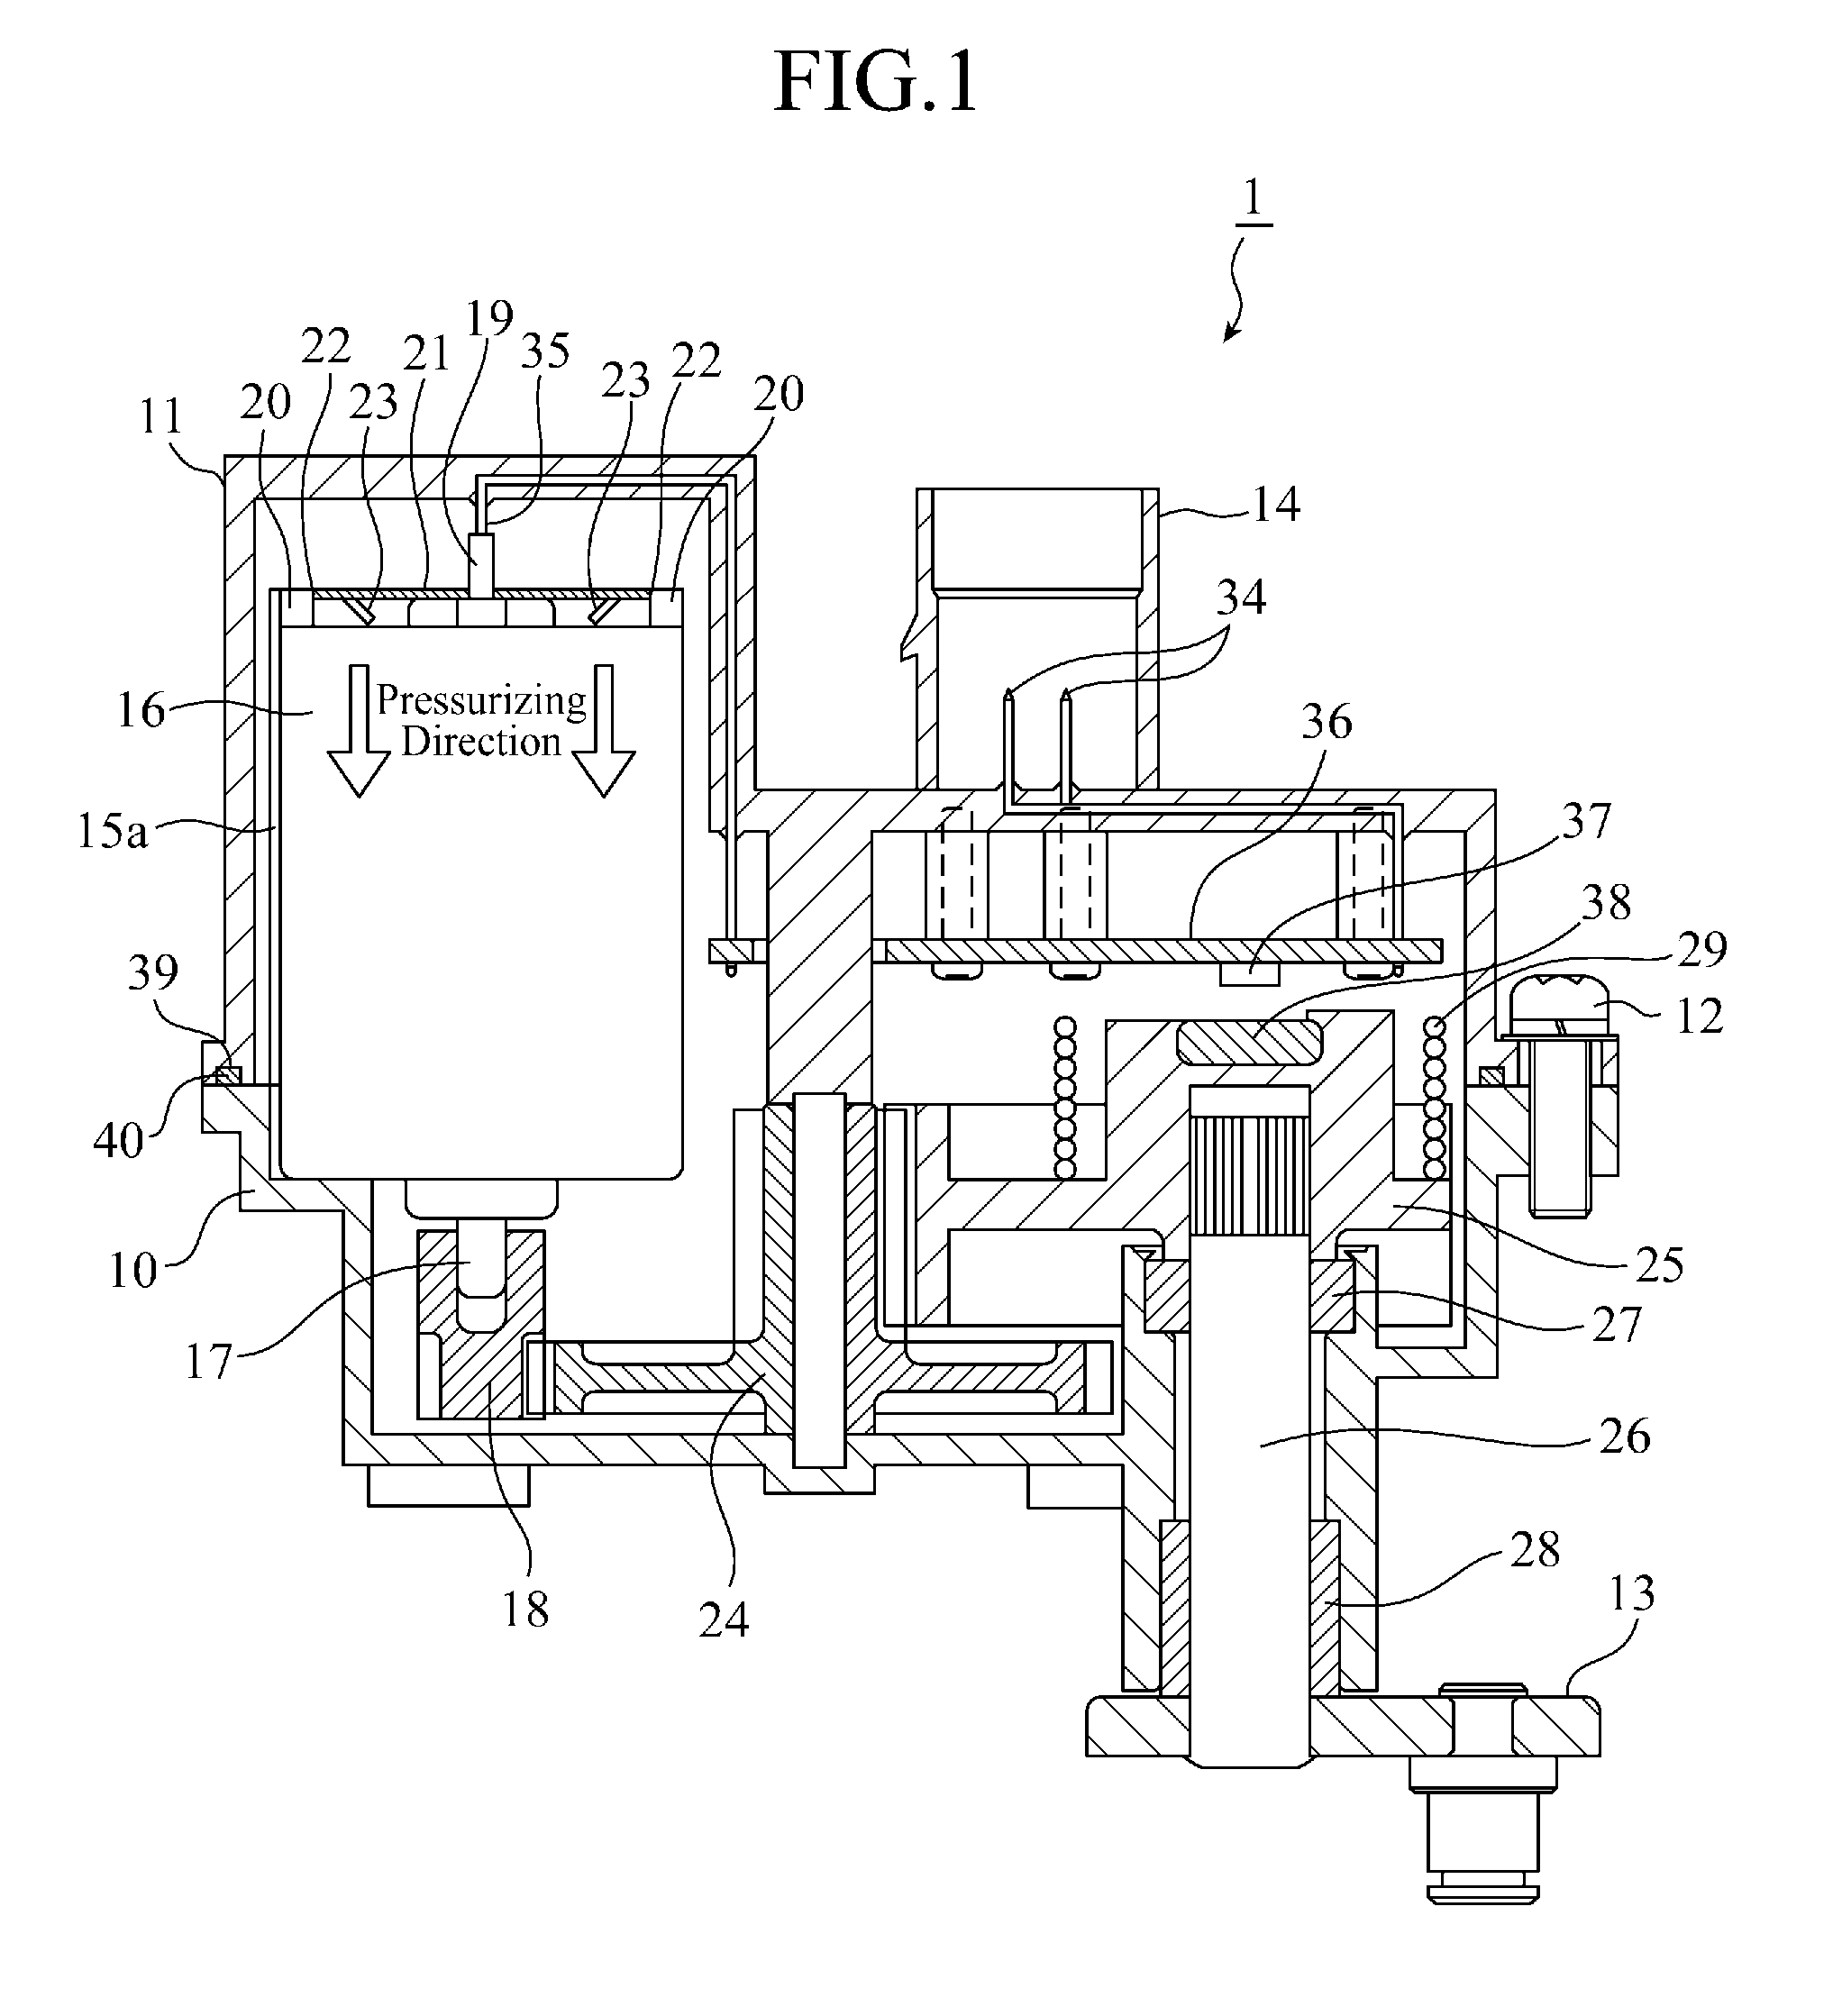 Electronically controlled actuator